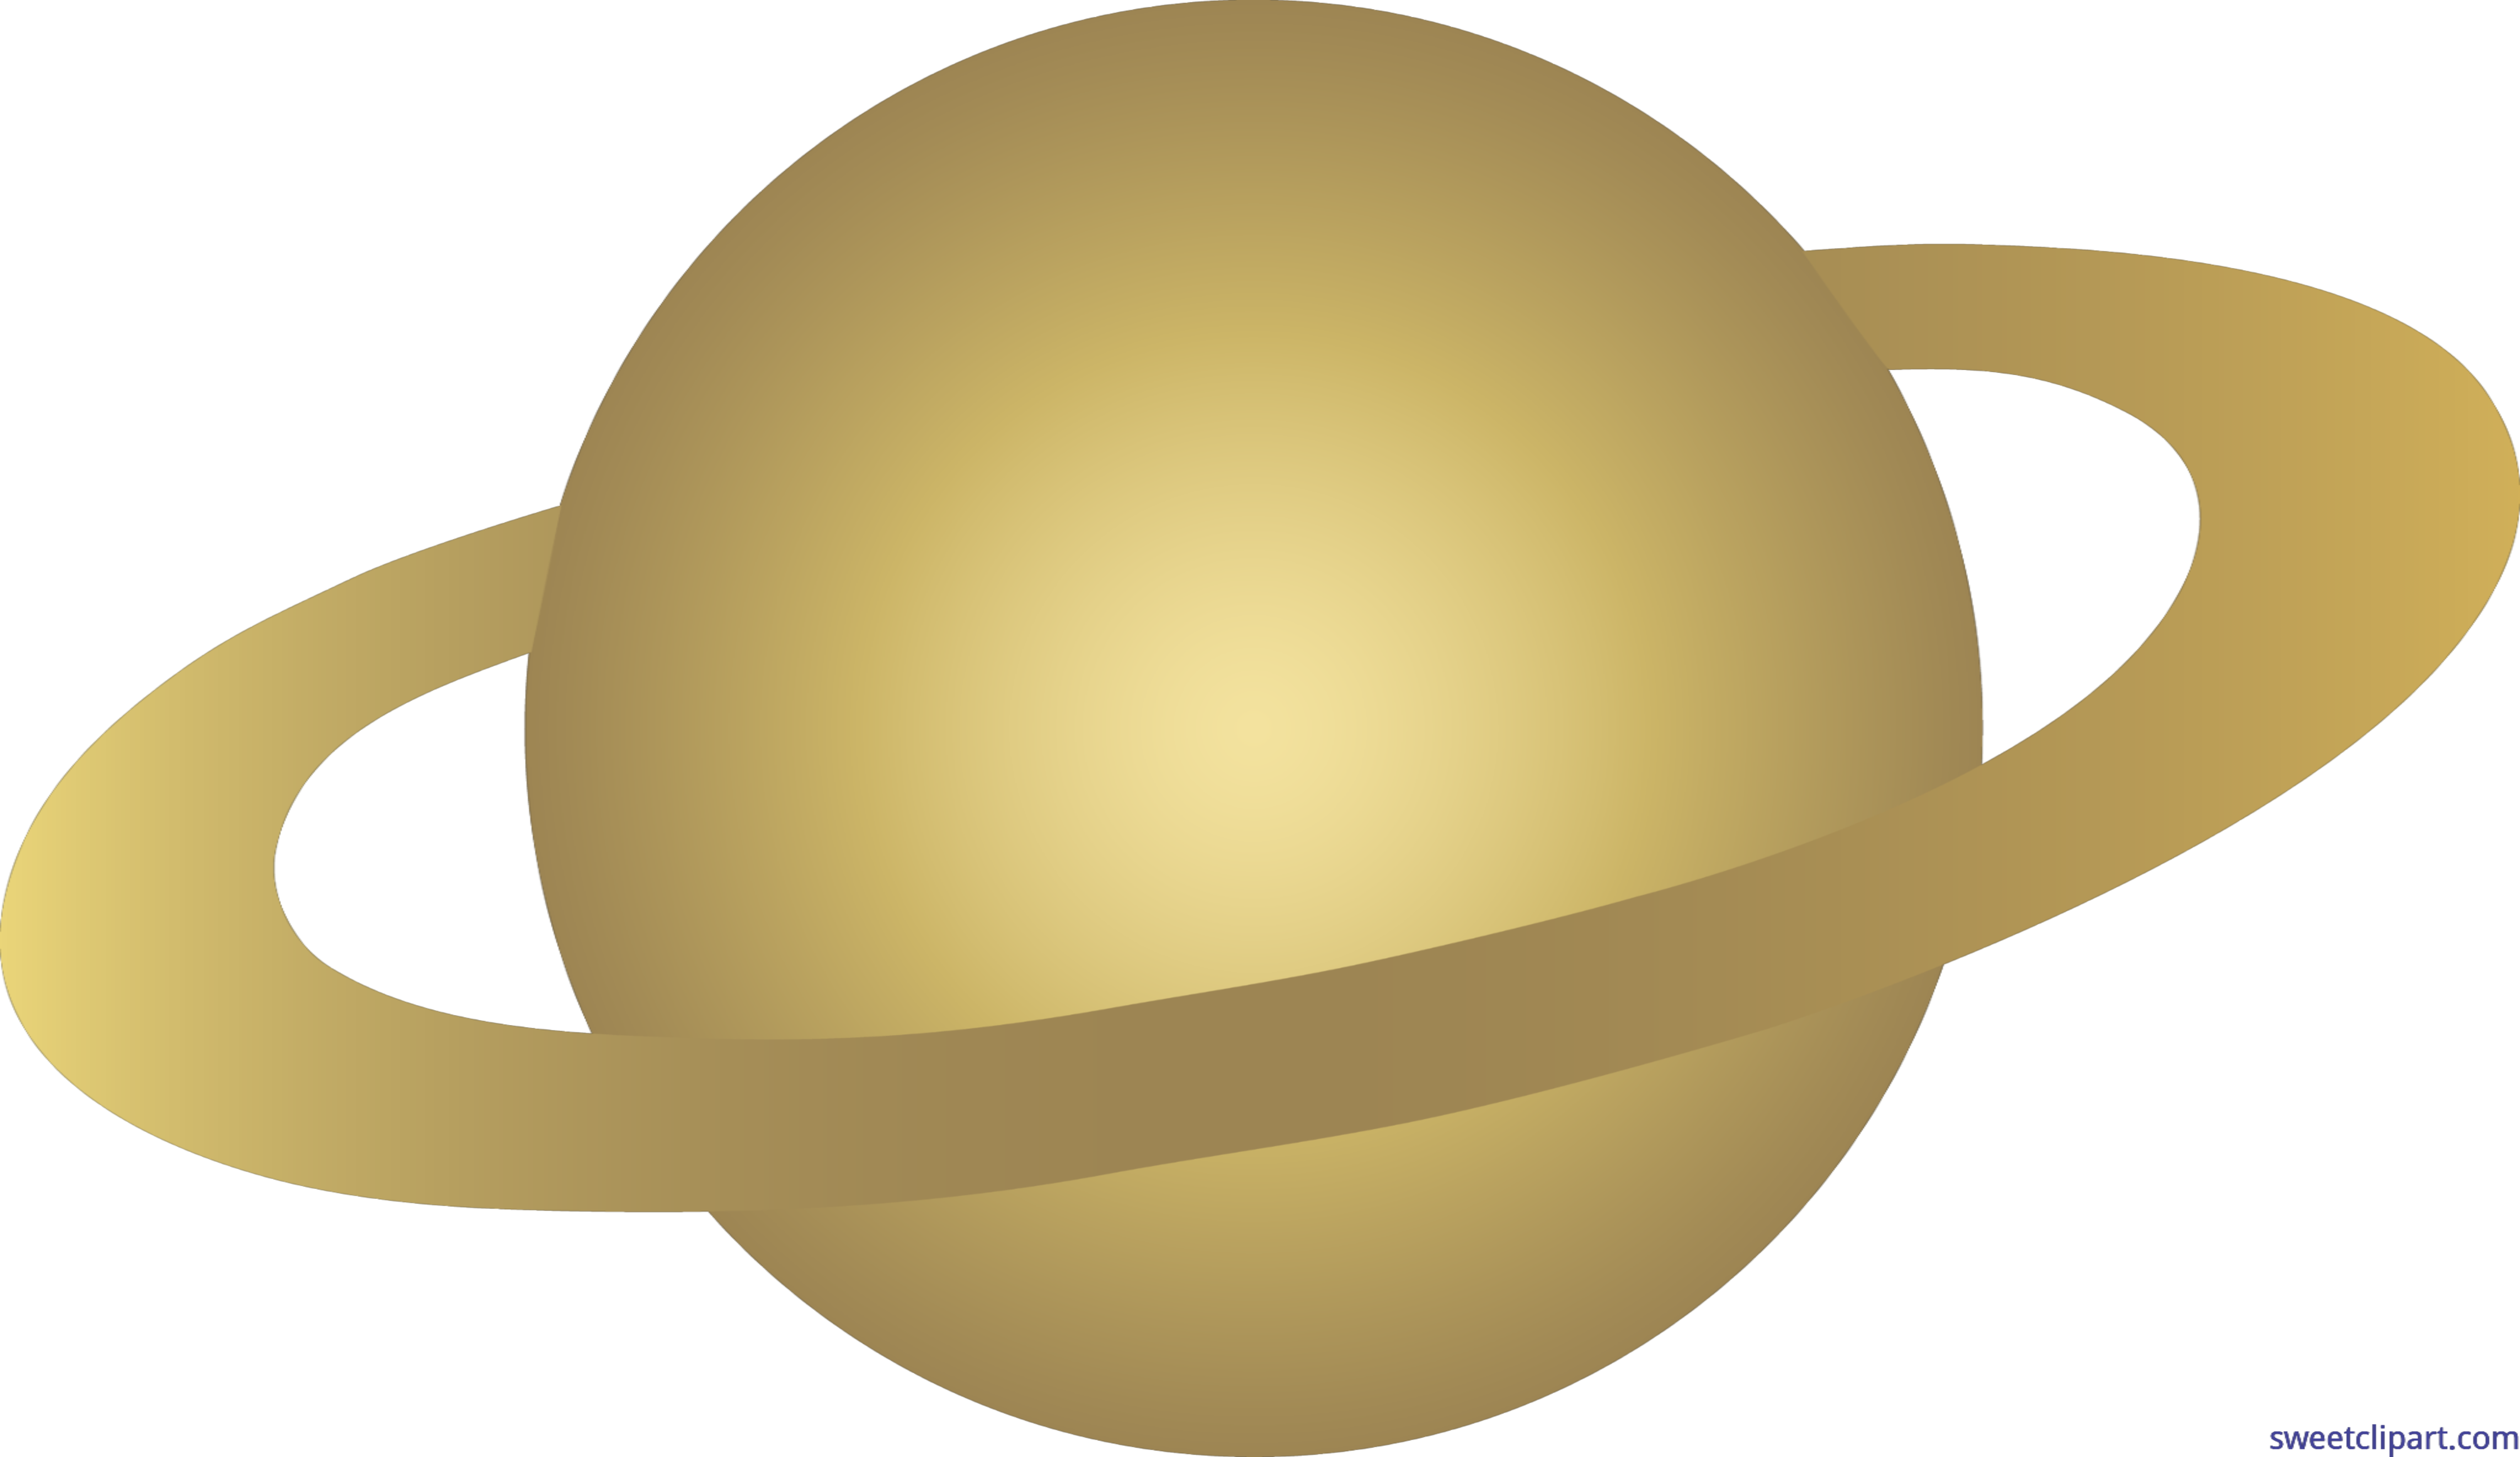 Alien ringed planet saturn. Planets clipart print